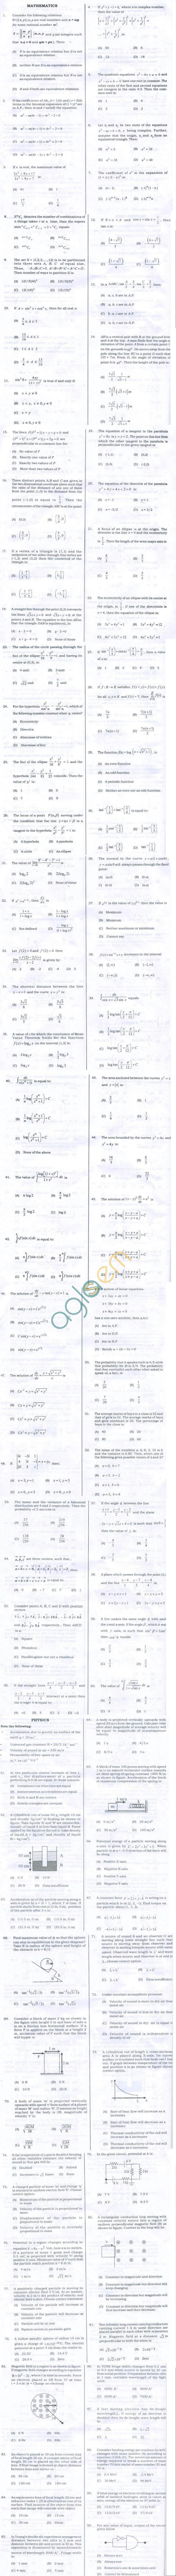 Sathyabama University Entrance Exam 2013 Question Papers